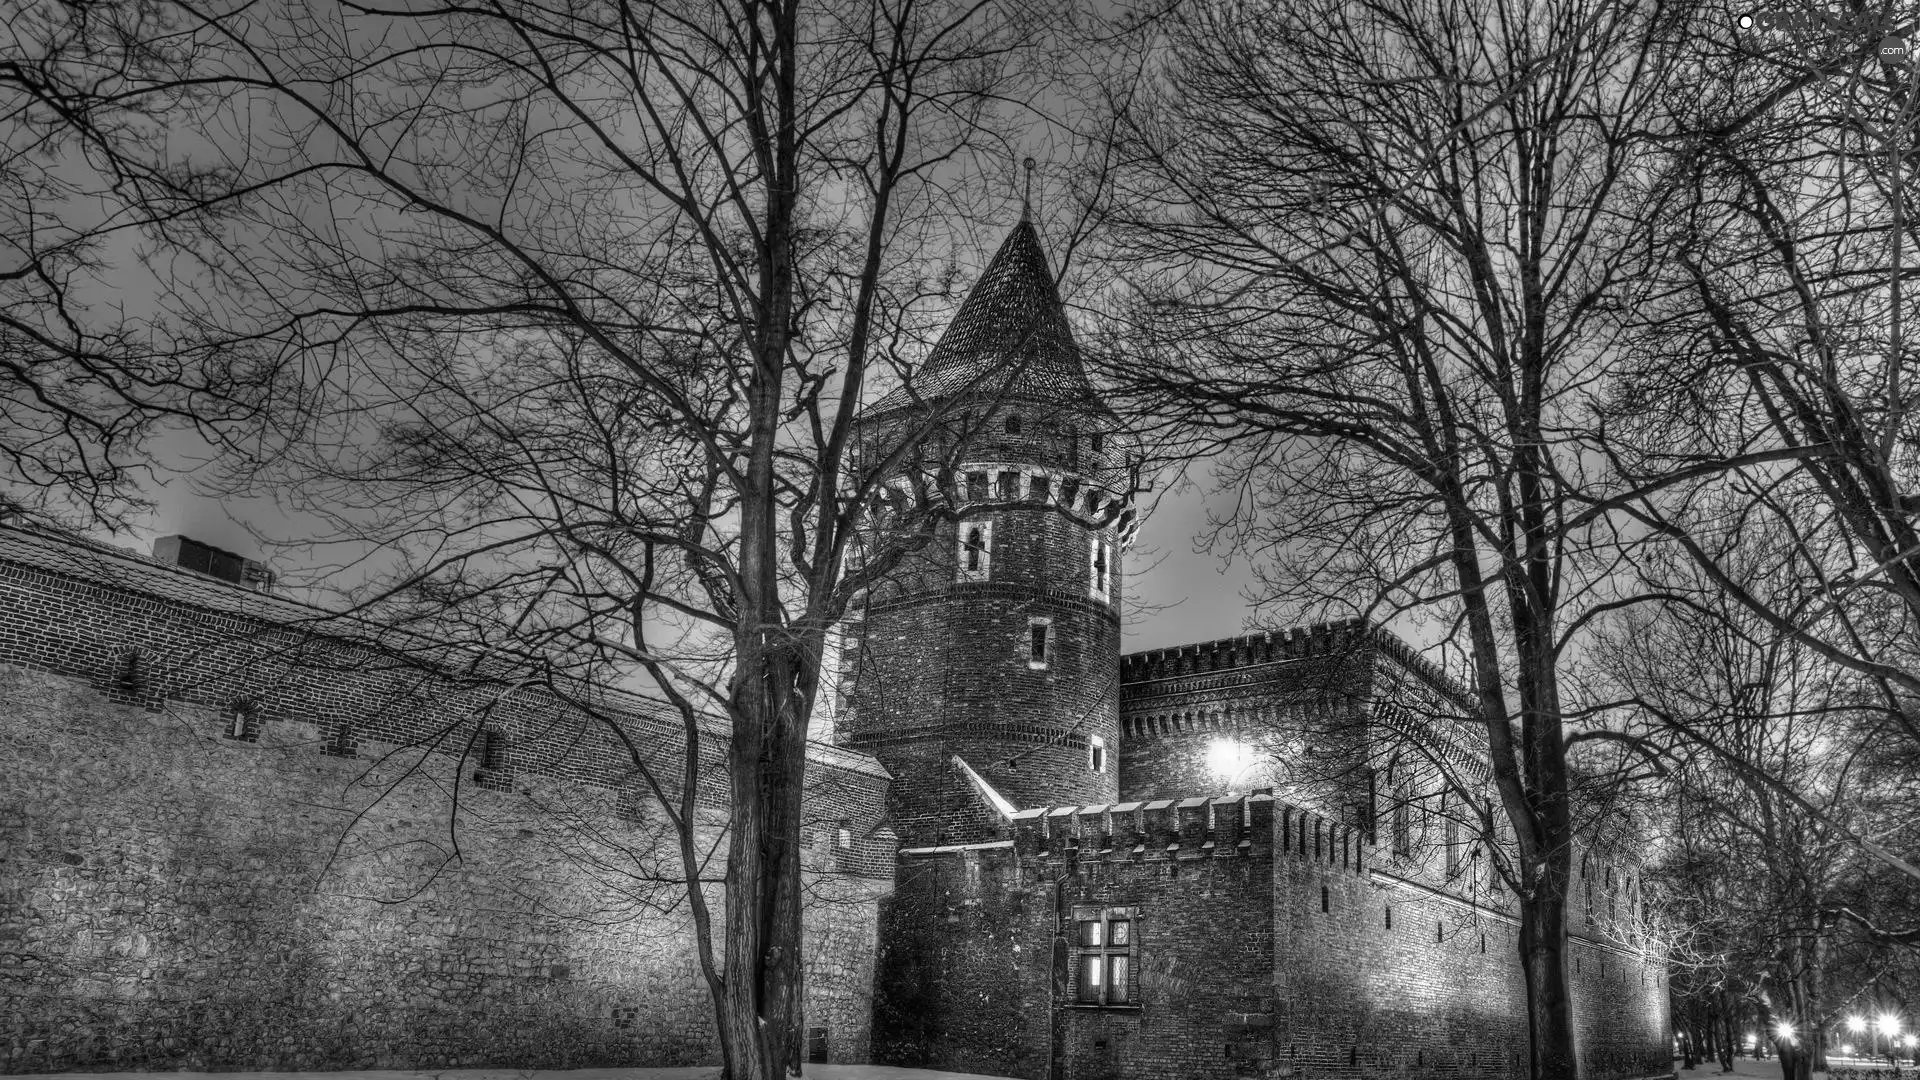 Castle, trees, viewes, winter